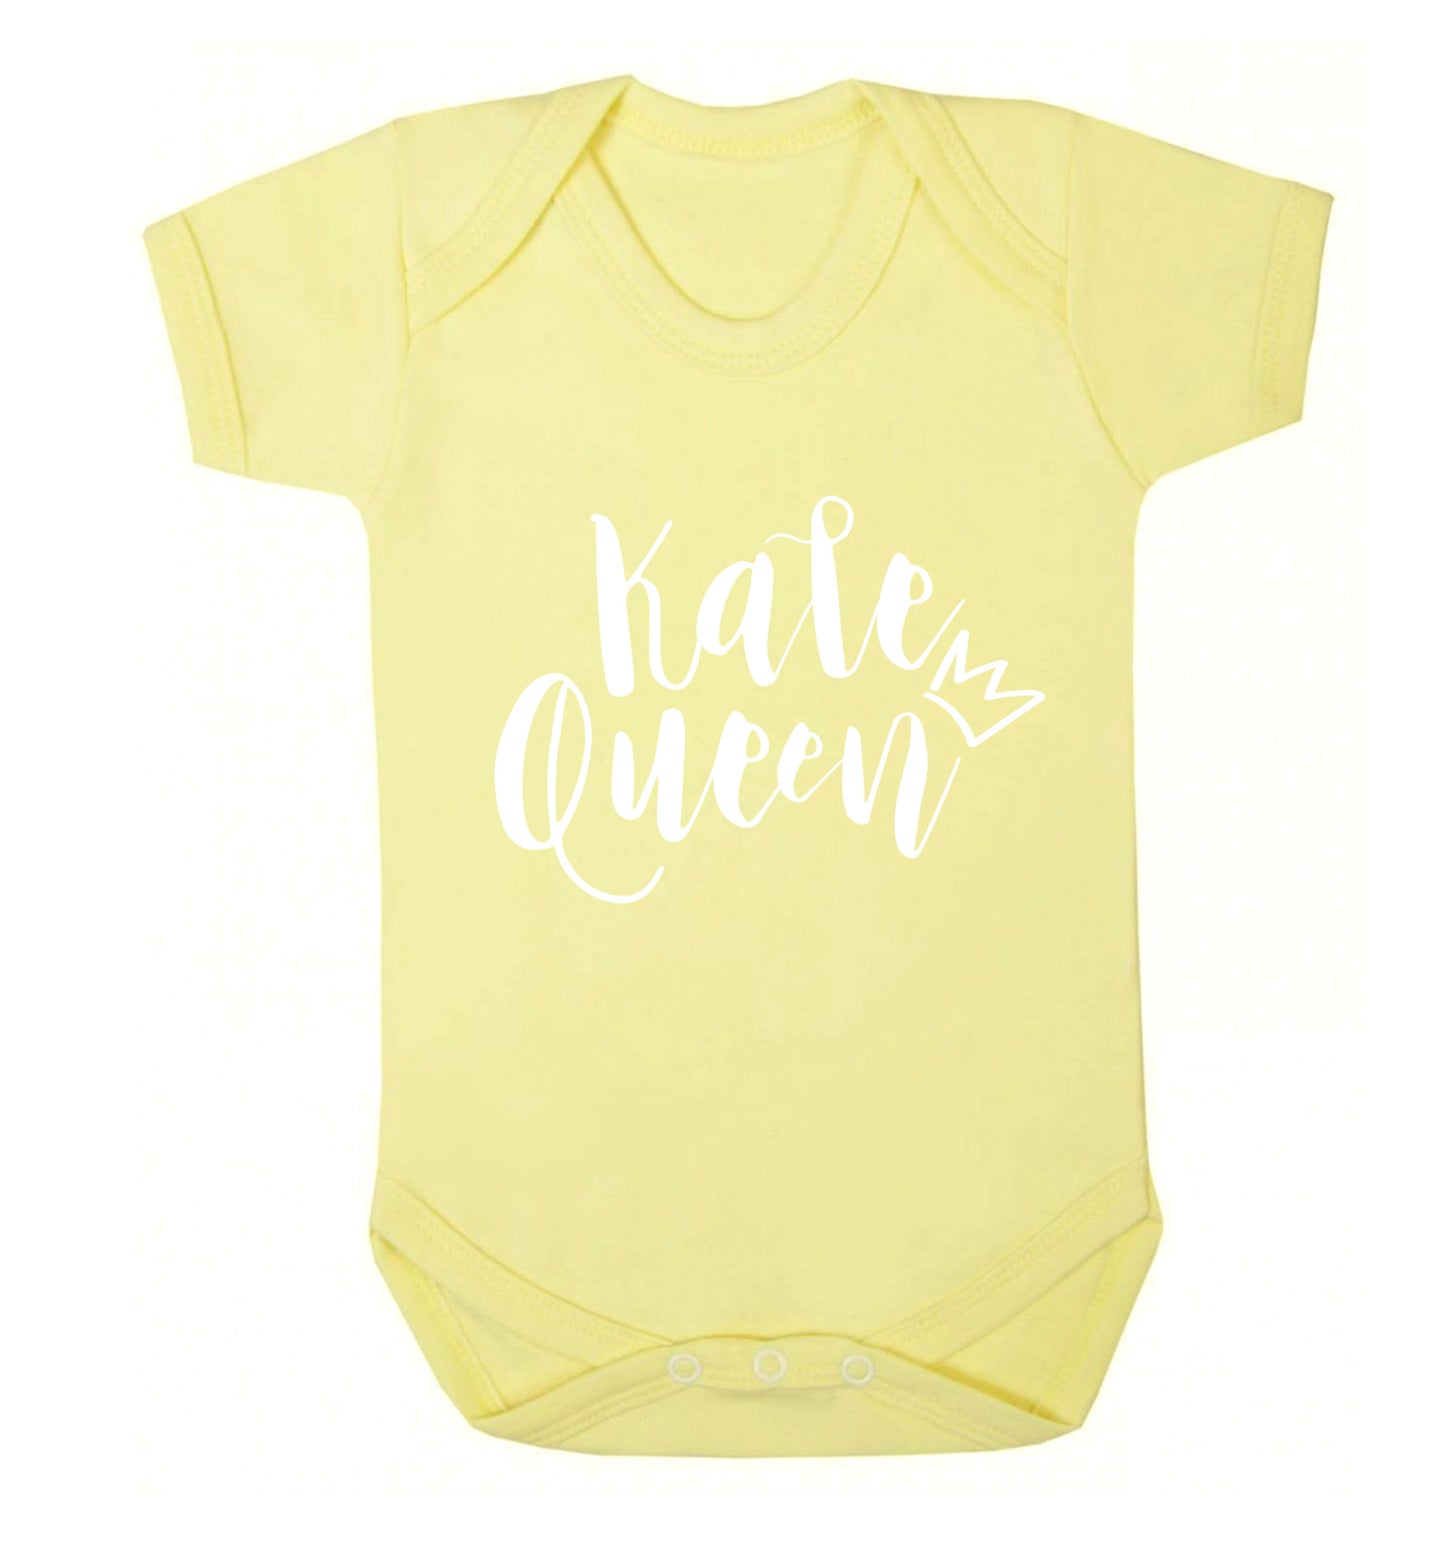 Kale Queen Baby Vest pale yellow 18-24 months